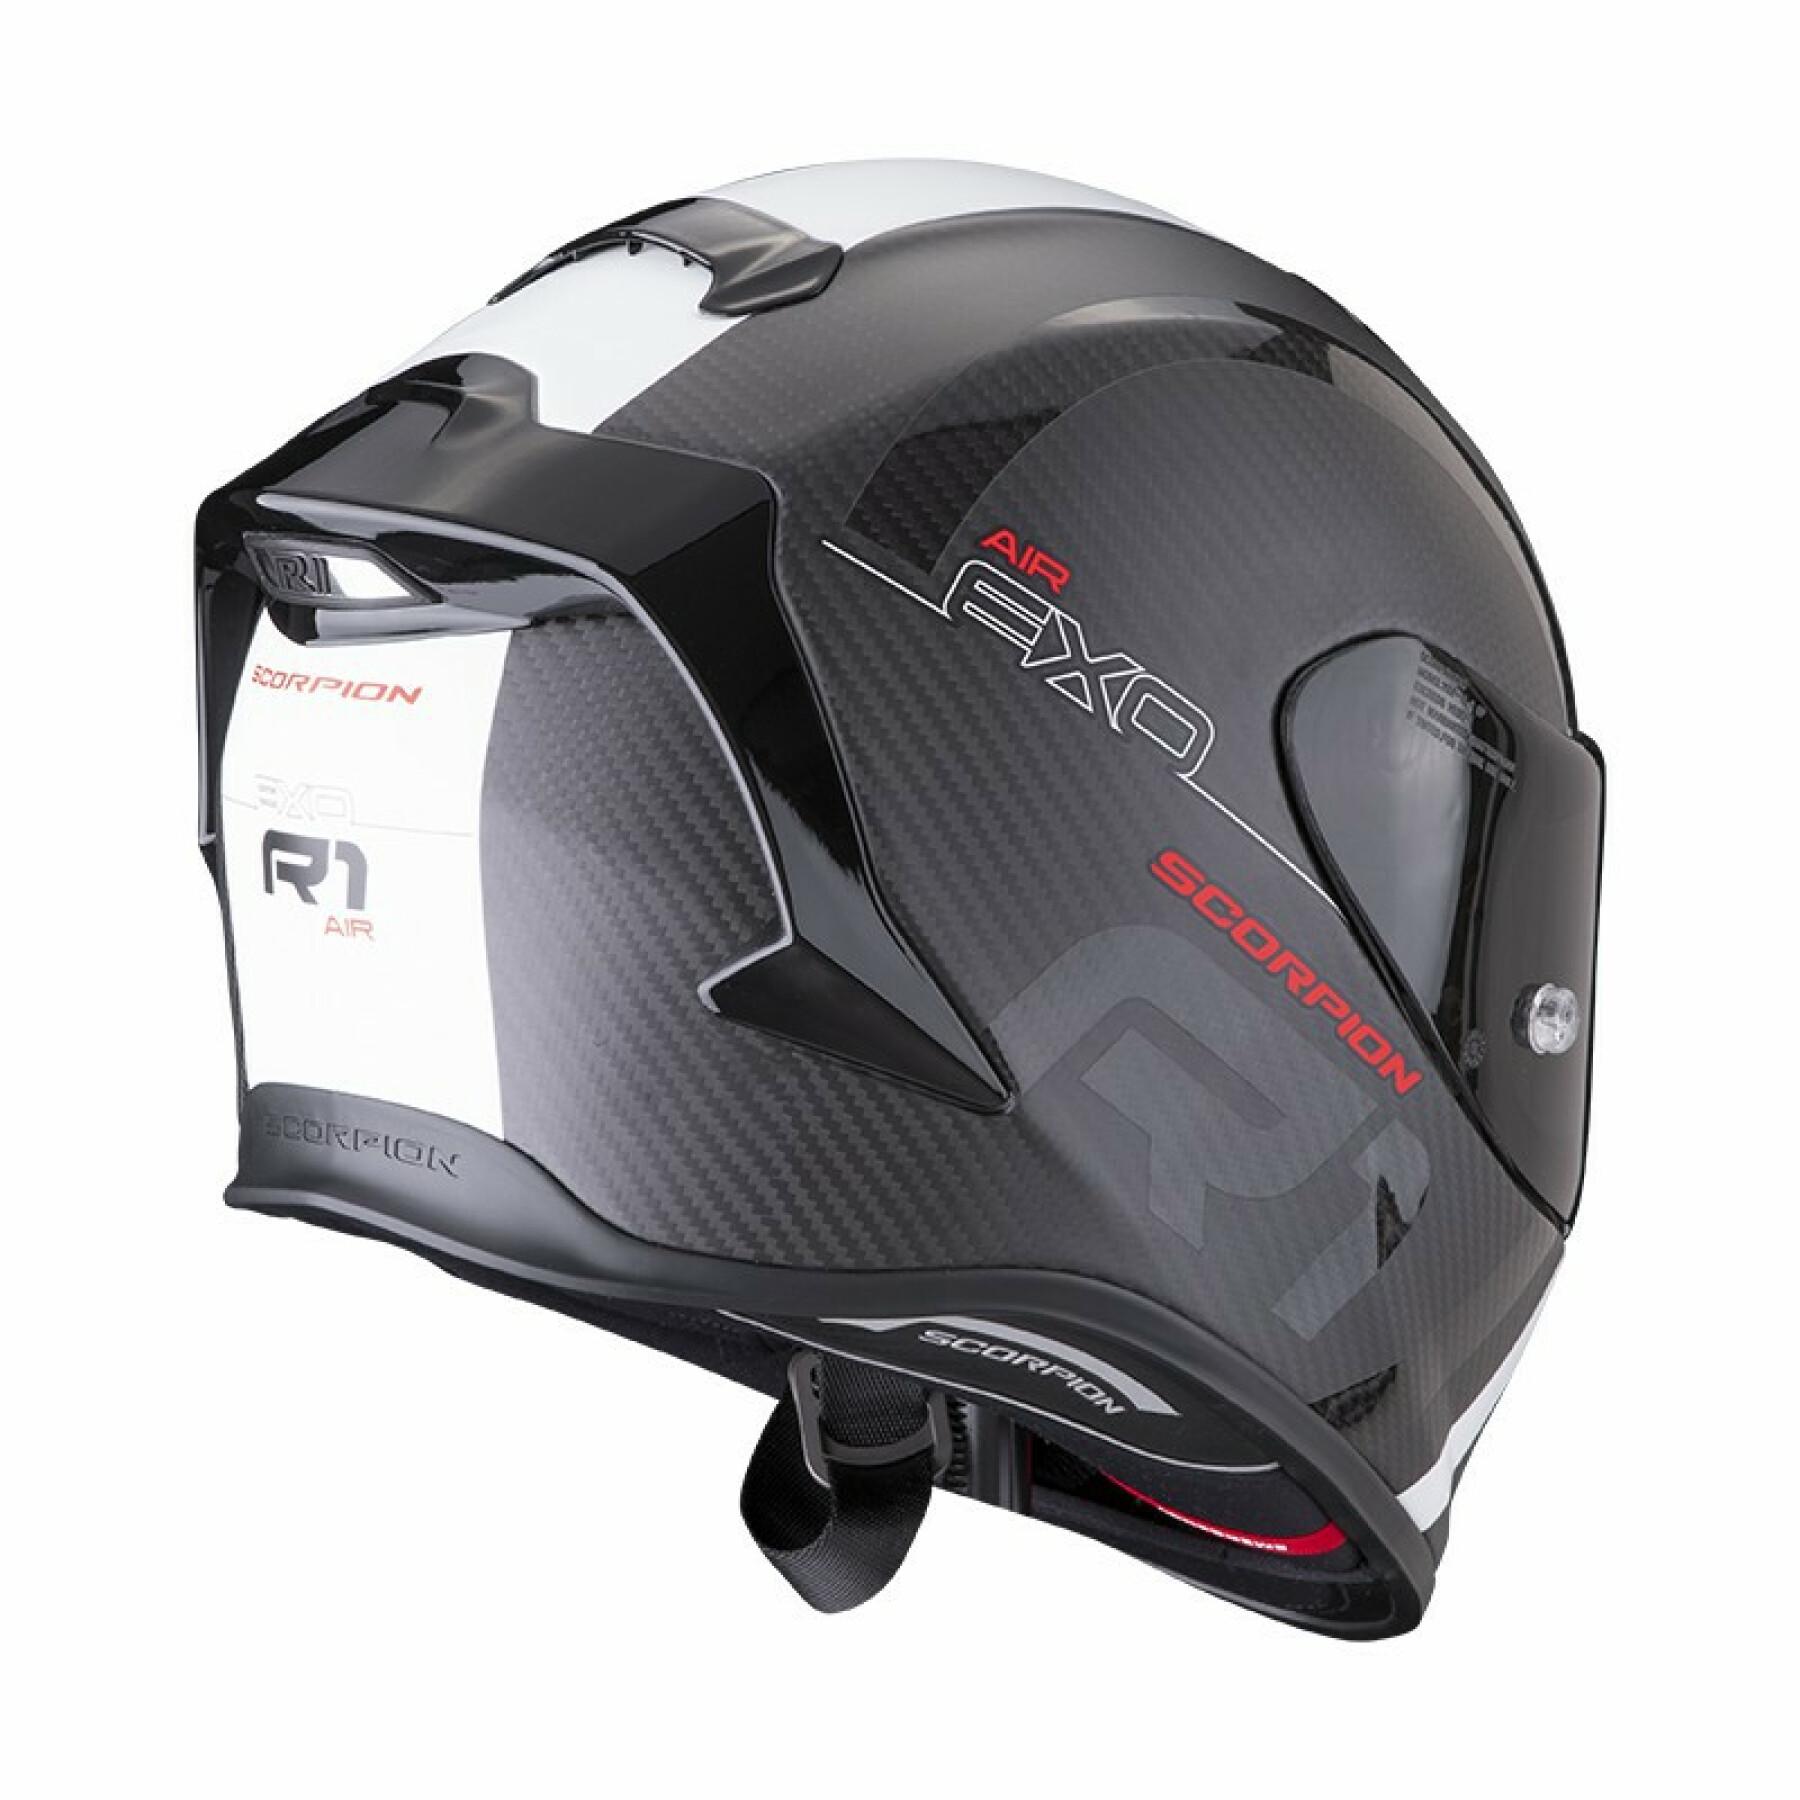 Capacete facial completo Scorpion Exo-R1 Carbon Air MG